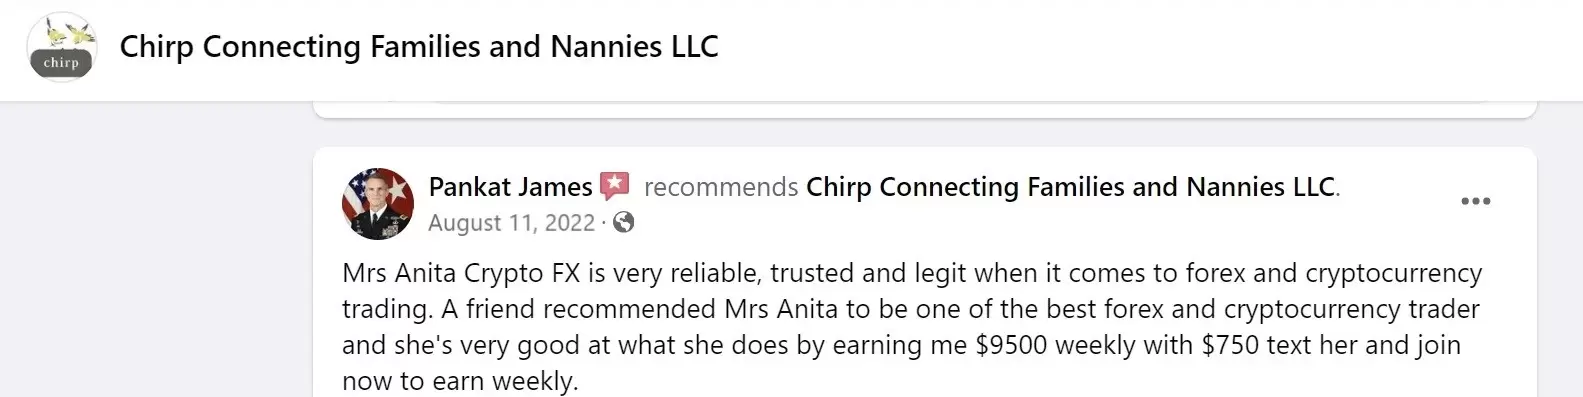 positive review of Chirp! Connecting Families and Nannies